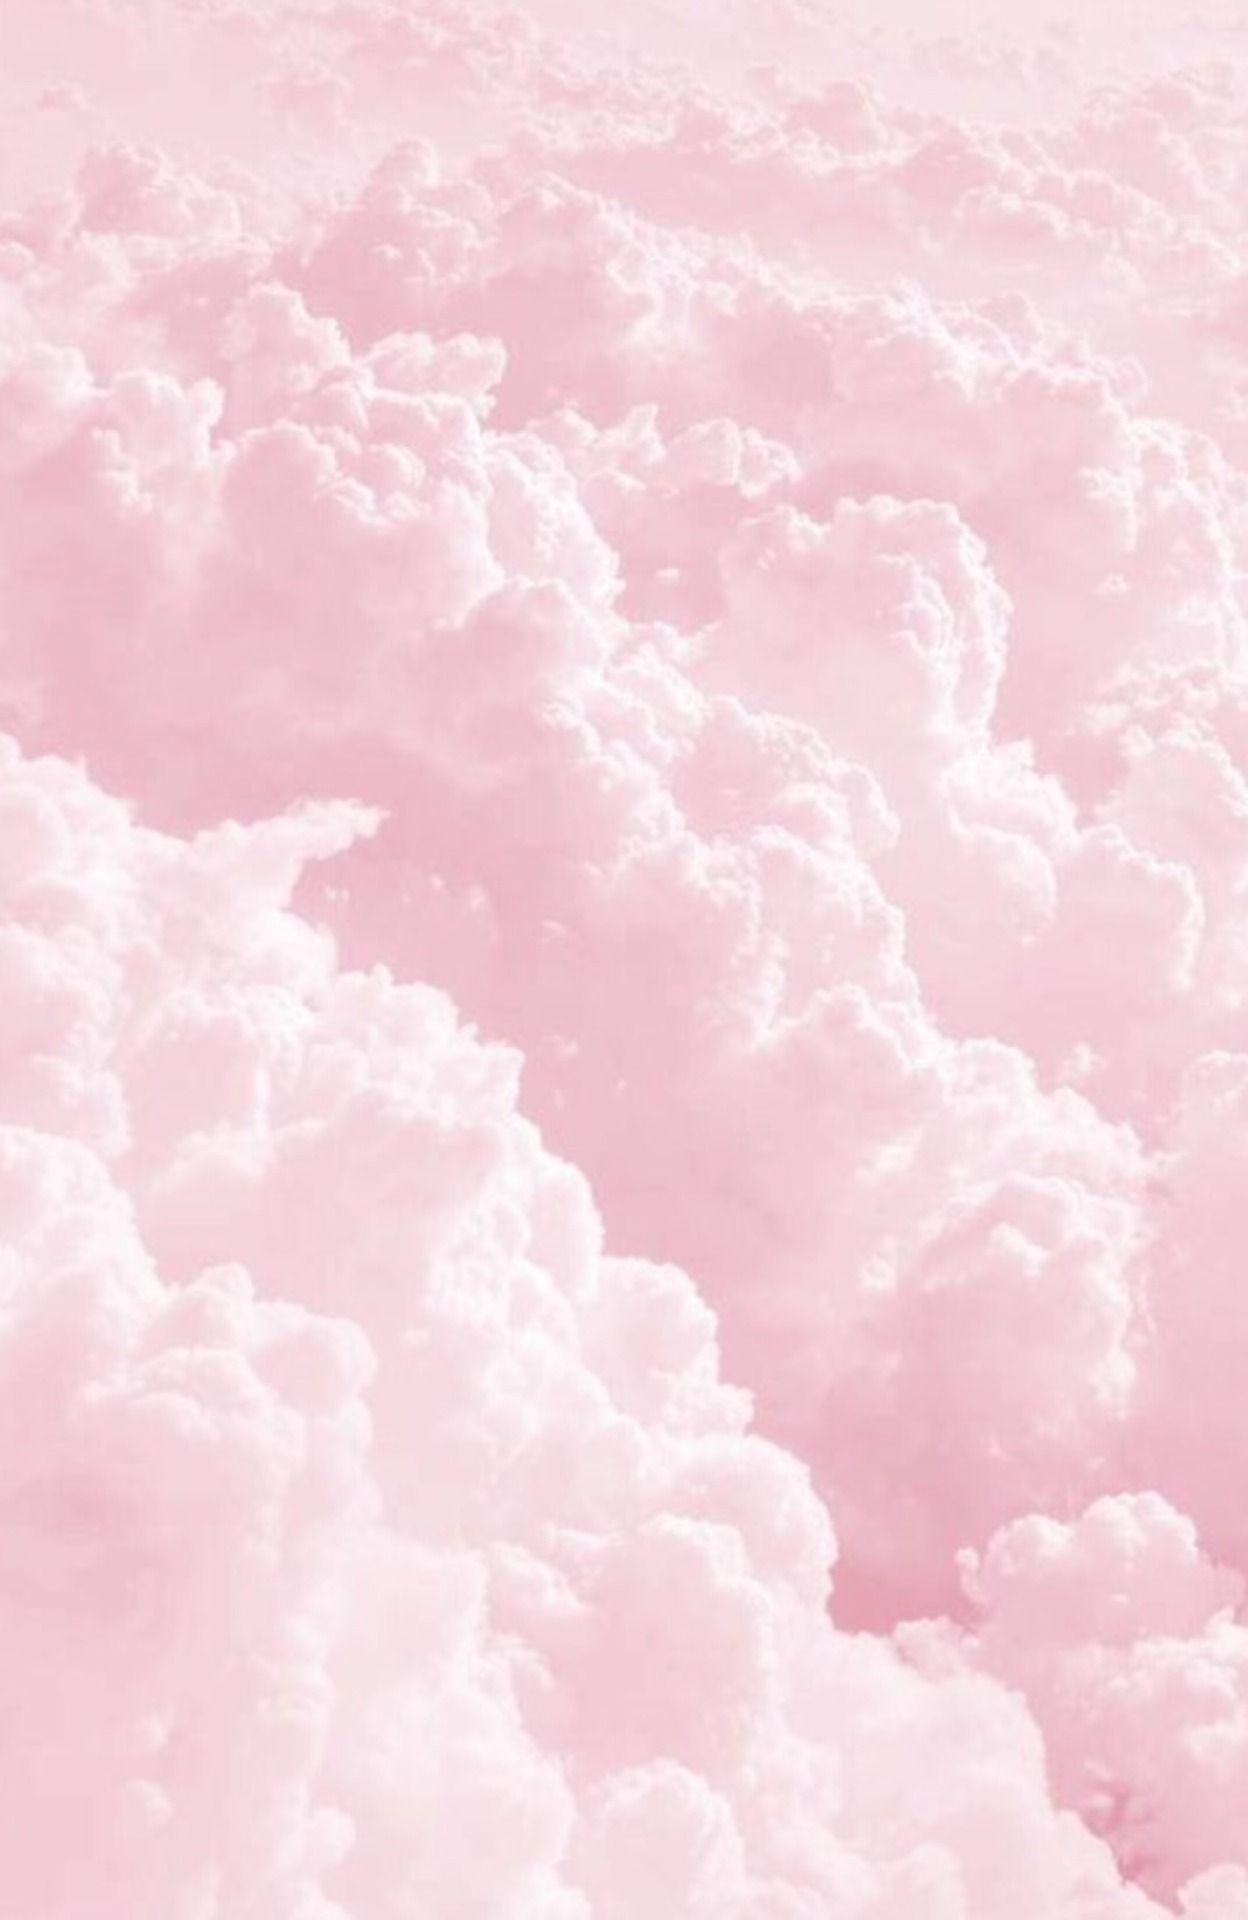 1500 Pink Clouds Pictures  Download Free Images on Unsplash